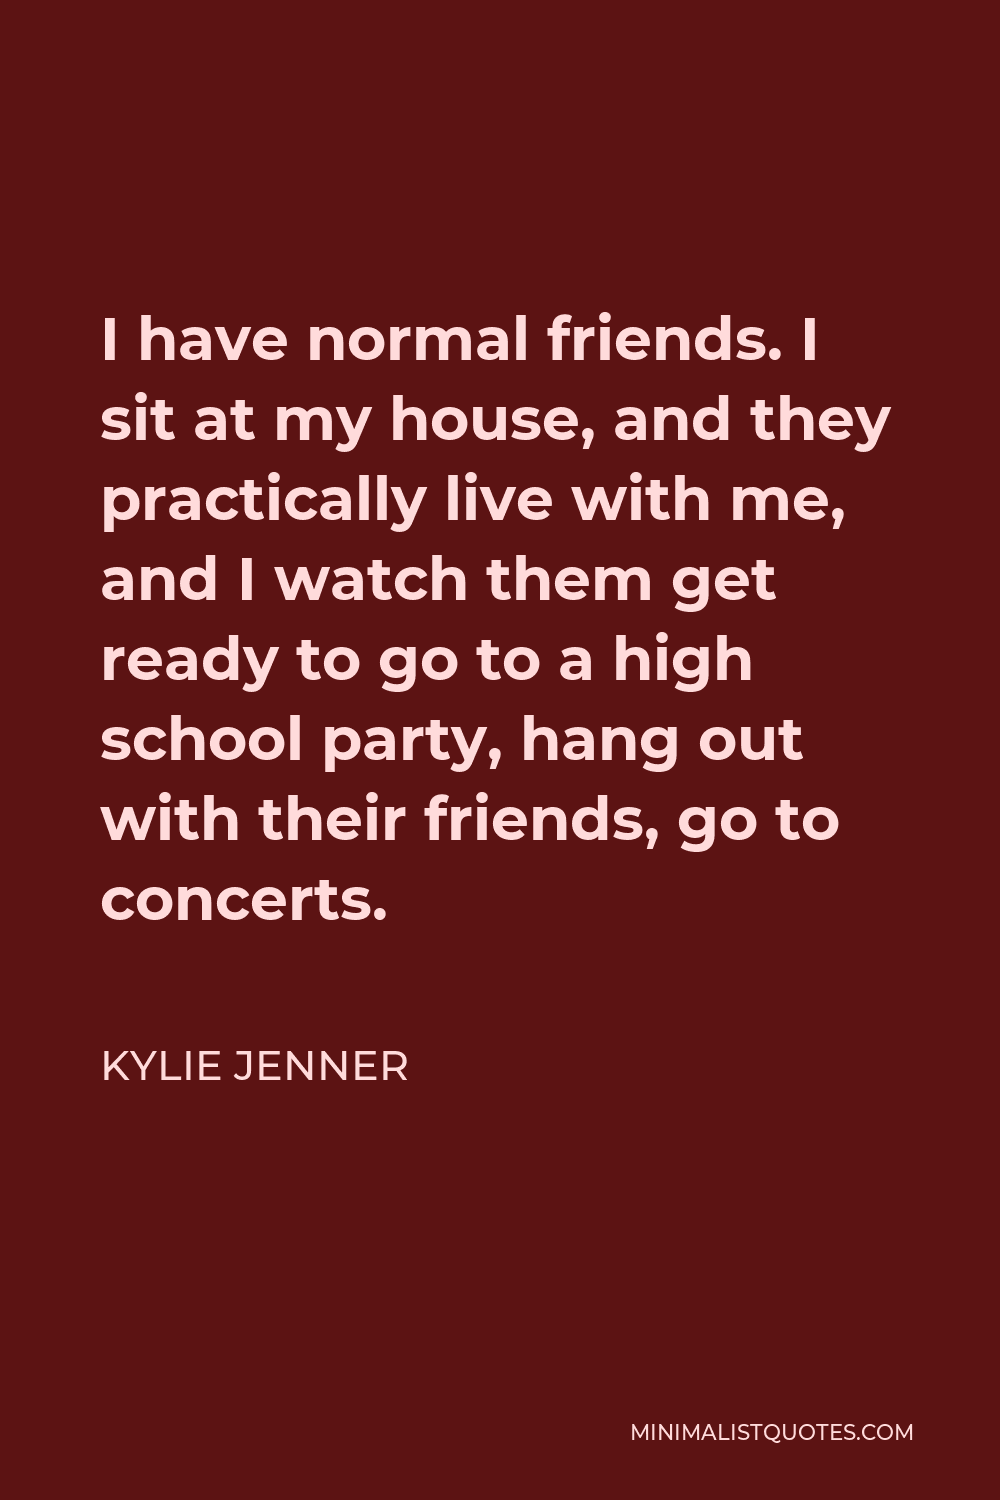 Kylie Jenner Quote - I have normal friends. I sit at my house, and they practically live with me, and I watch them get ready to go to a high school party, hang out with their friends, go to concerts.